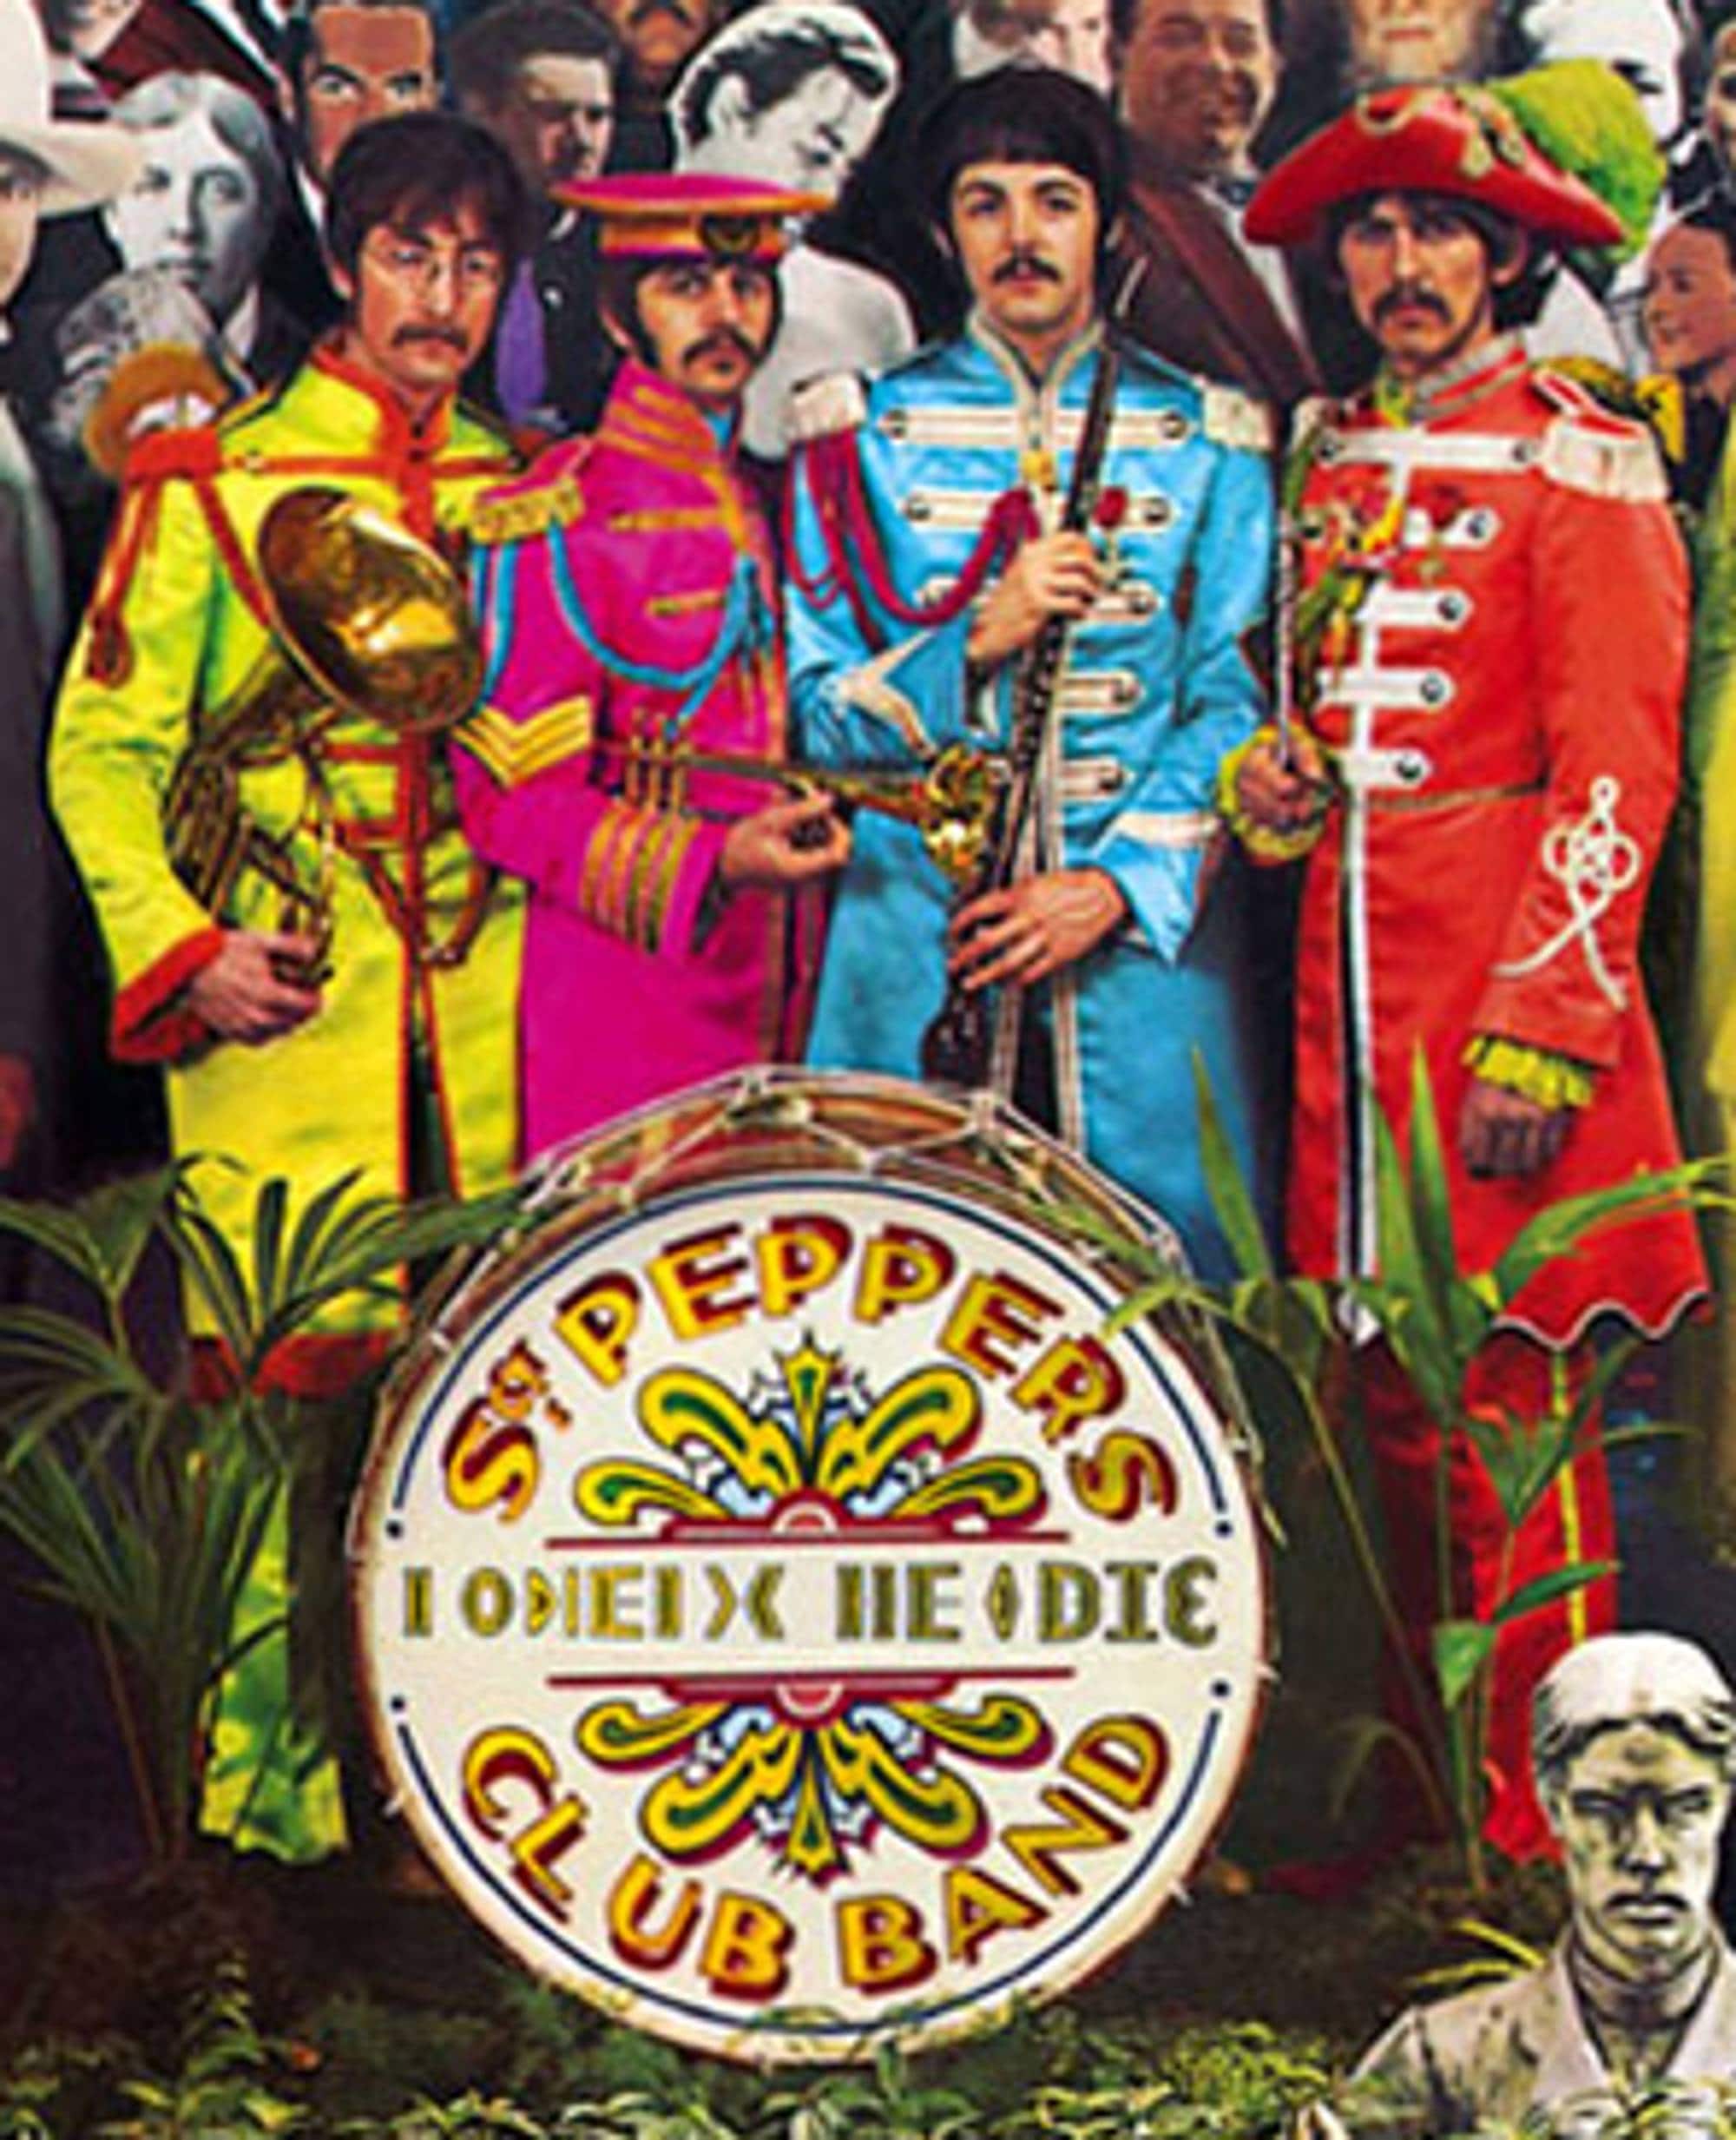 Beatles sgt peppers lonely hearts club. Обложка альбома Битлз Sgt Pepper s Lonely Hearts Club Band. Обложка Битлз сержант Пеппер. The Beatles Sgt. Pepper's Lonely Hearts Club Band обложка. Sgt. Pepper's Lonely Hearts Club Band Битлз.